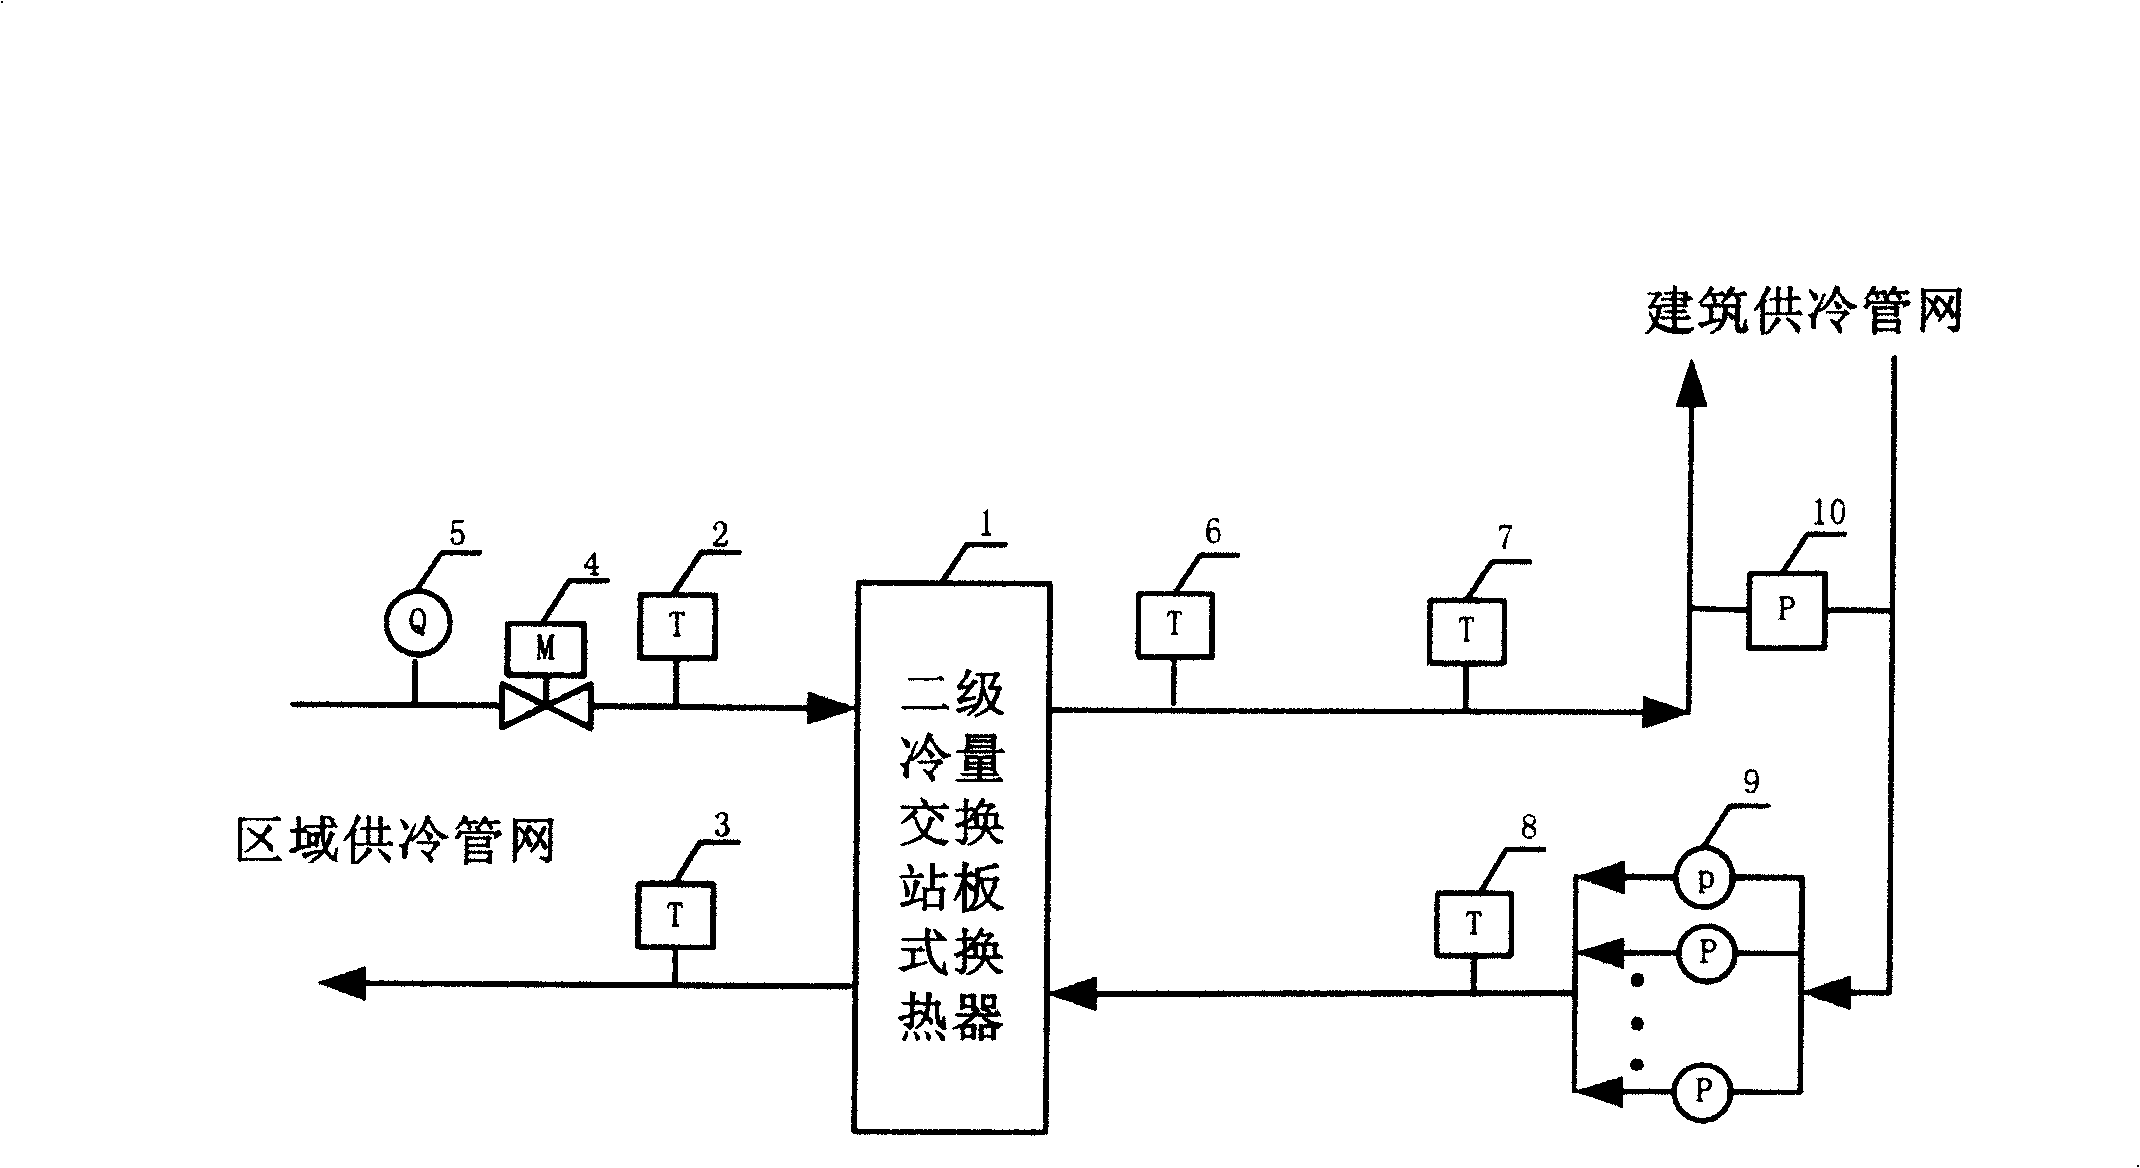 Cold volume governing system for regionally concentrated cold supply second-stage cold volume exchange station